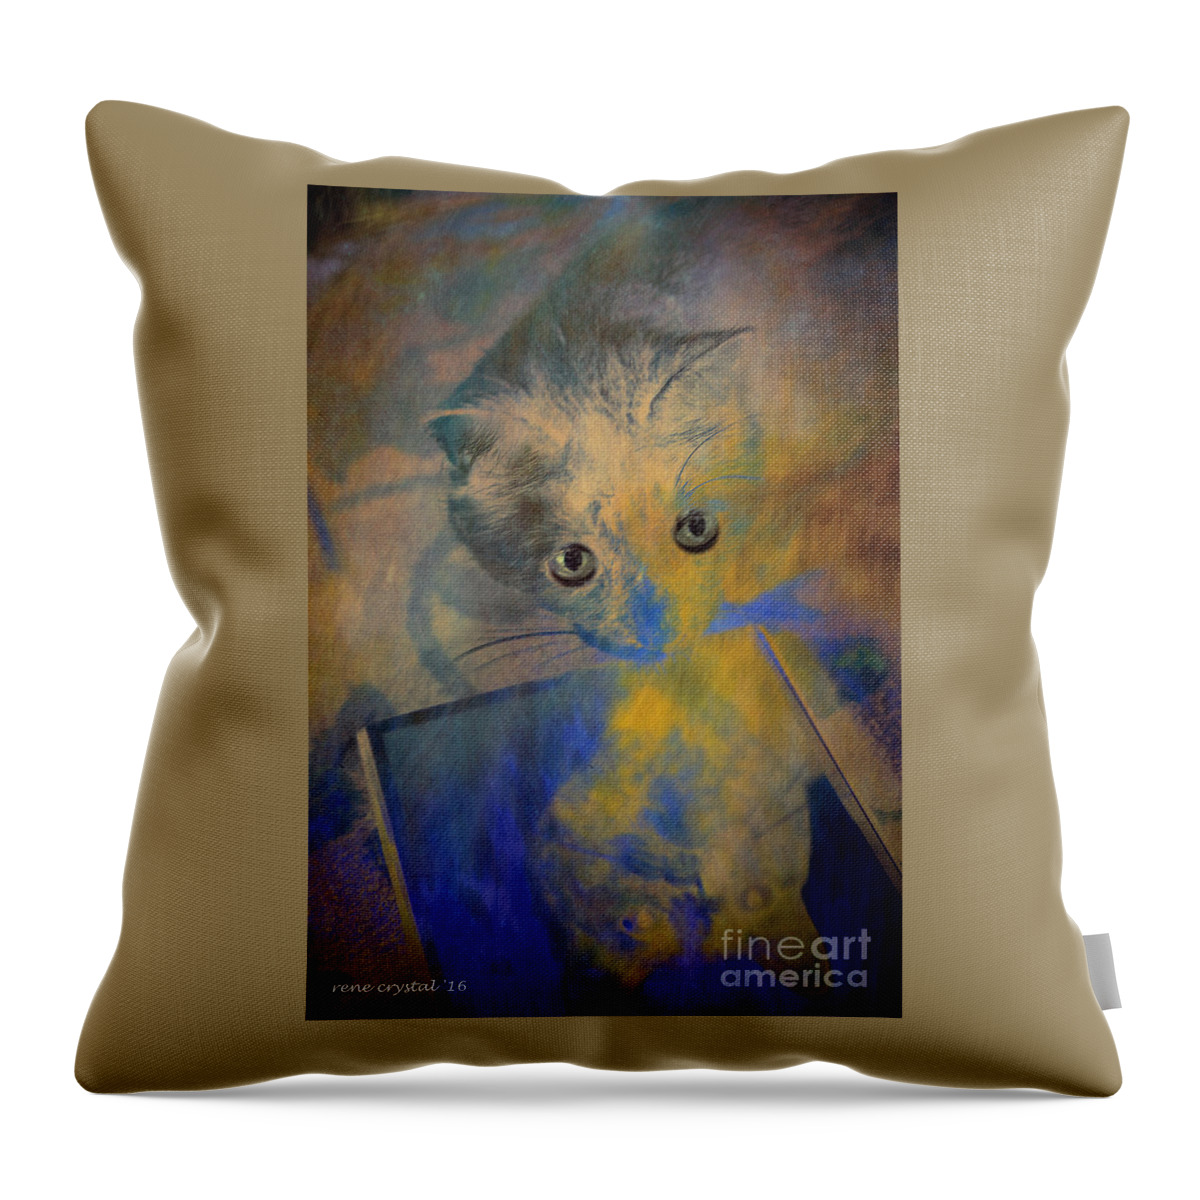 Kitty Throw Pillow featuring the photograph Could it be? Another kitty as pretty as me? by Rene Crystal